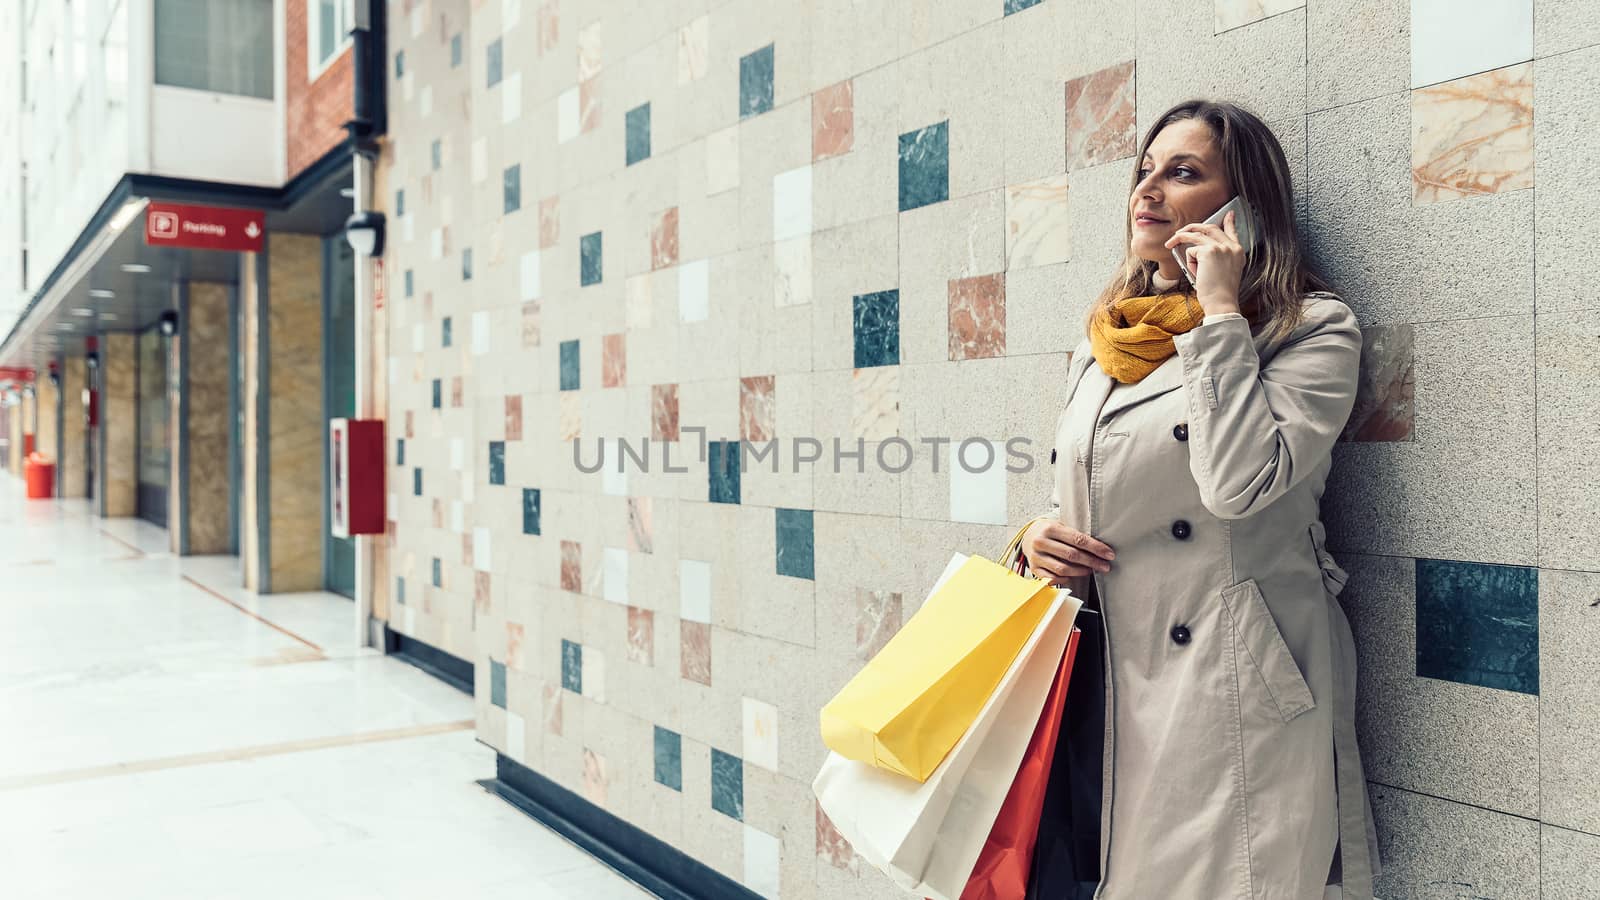 Adult woman wearing a beige raincoat and yellow scarf talking on her mobile phone while holding shopping colorful bags. Space for your text.